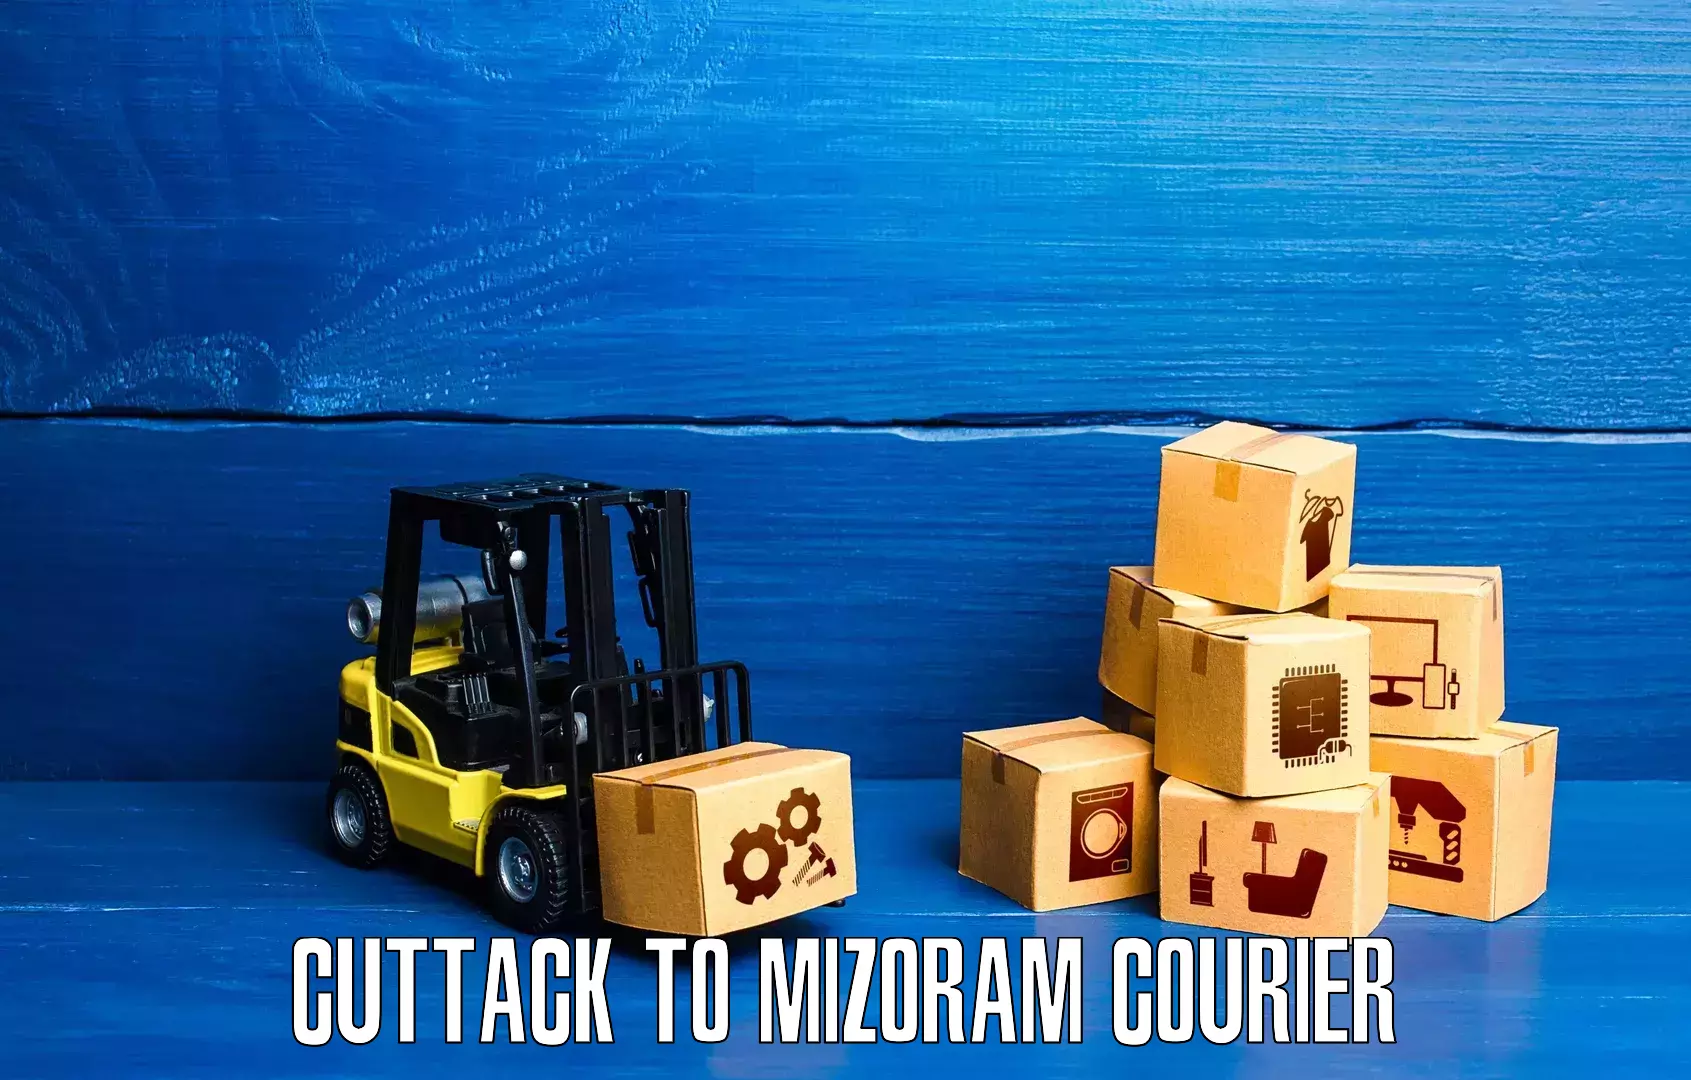 Quality courier partnerships Cuttack to Mizoram